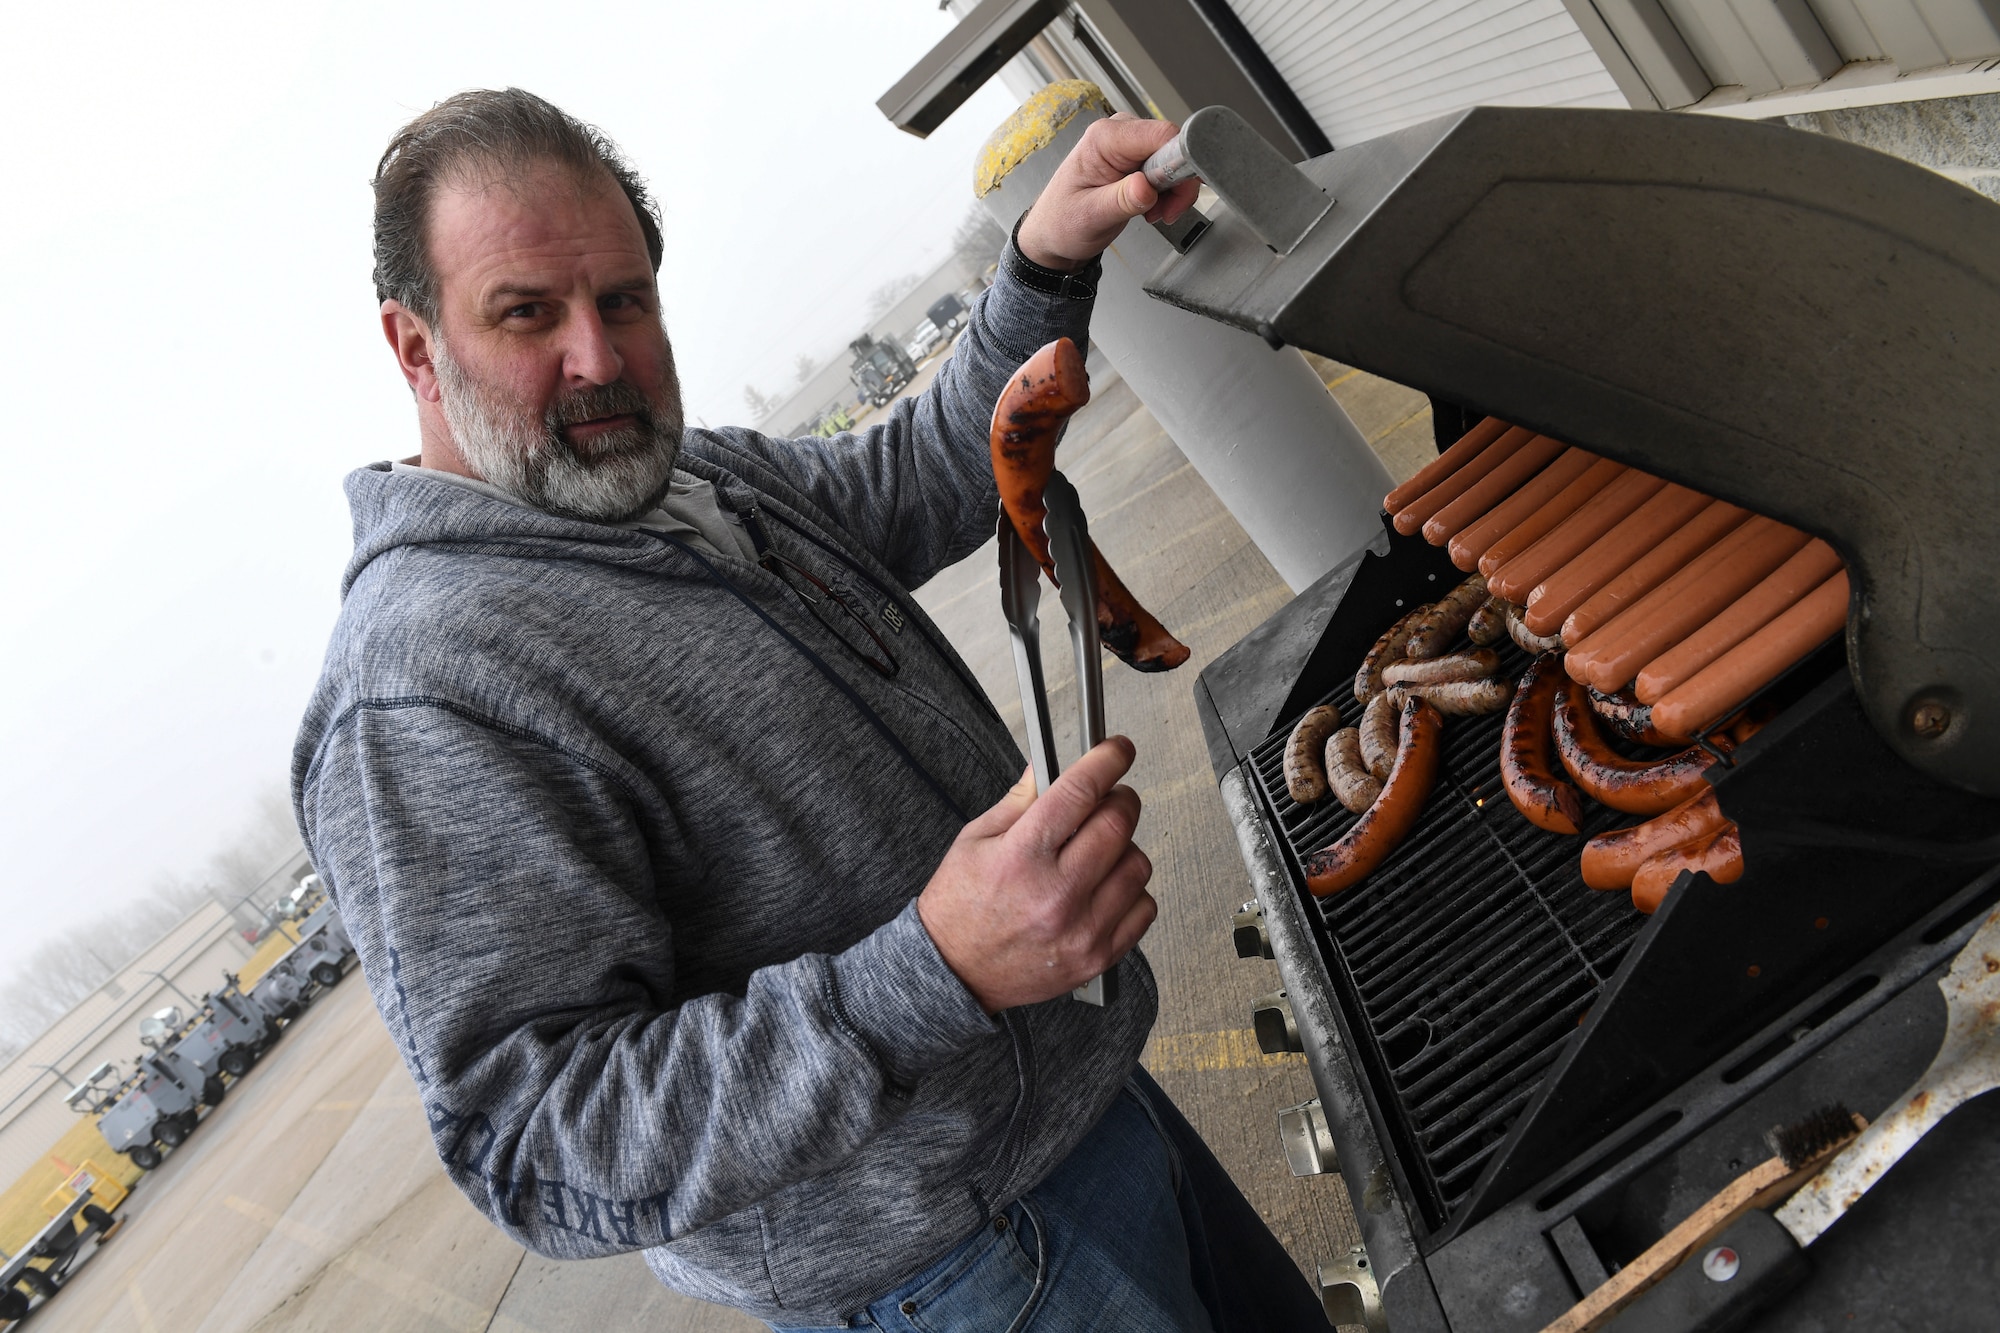 Richard Oram, occupational safety manager with the 911th Airlift Wing Safety Office, shows off his grilling skills while preparing a home-cooked meal for members of the 911th Maintenance Group who are on a temporary duty assignment at Wright-Patterson Air Force Base, Ohio, Feb. 5, 2019. The meal was prepared on behalf of the group leadership and the Key Spouse Organization in appreciation of the tireless dedication the members have shown while being away from loved ones while they work away from home. (U.S. Air Force photo by Joshua J. Seybert)